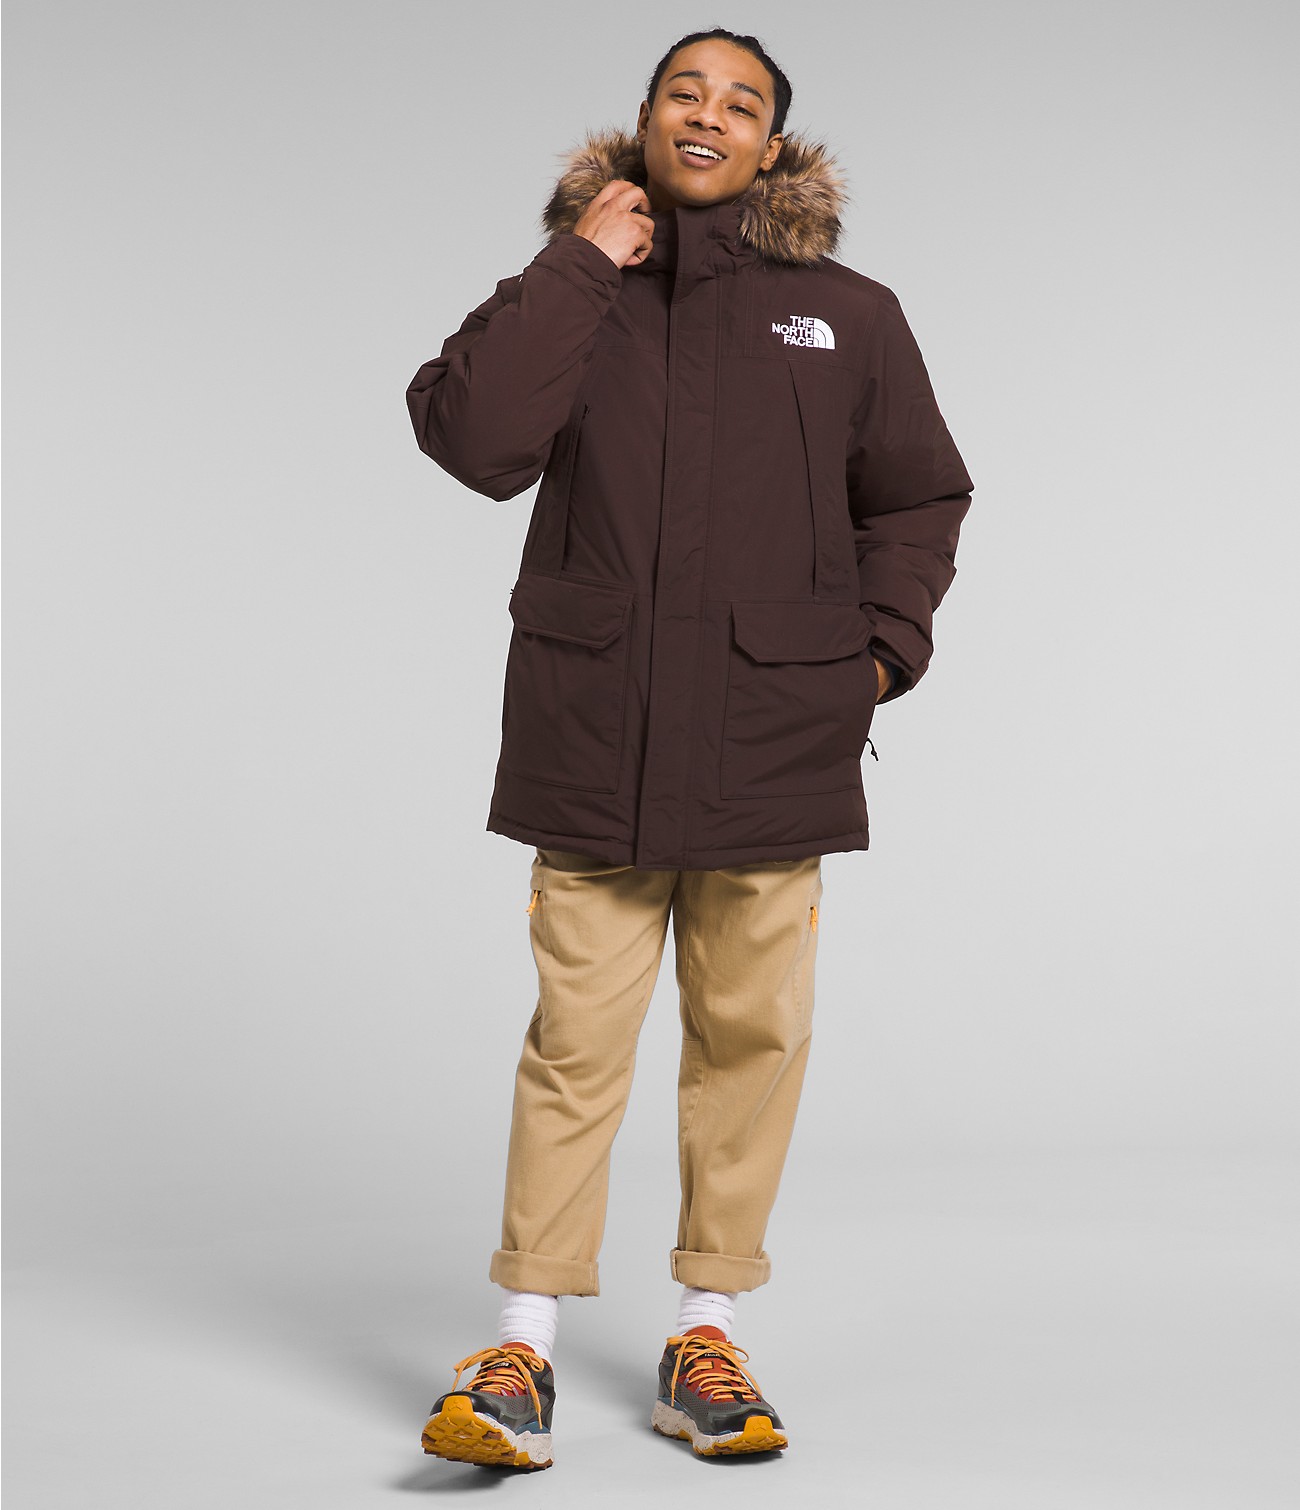 Unlock Wilderness' choice in the Point Zero Vs North Face comparison, the McMurdo Parka by The North Face